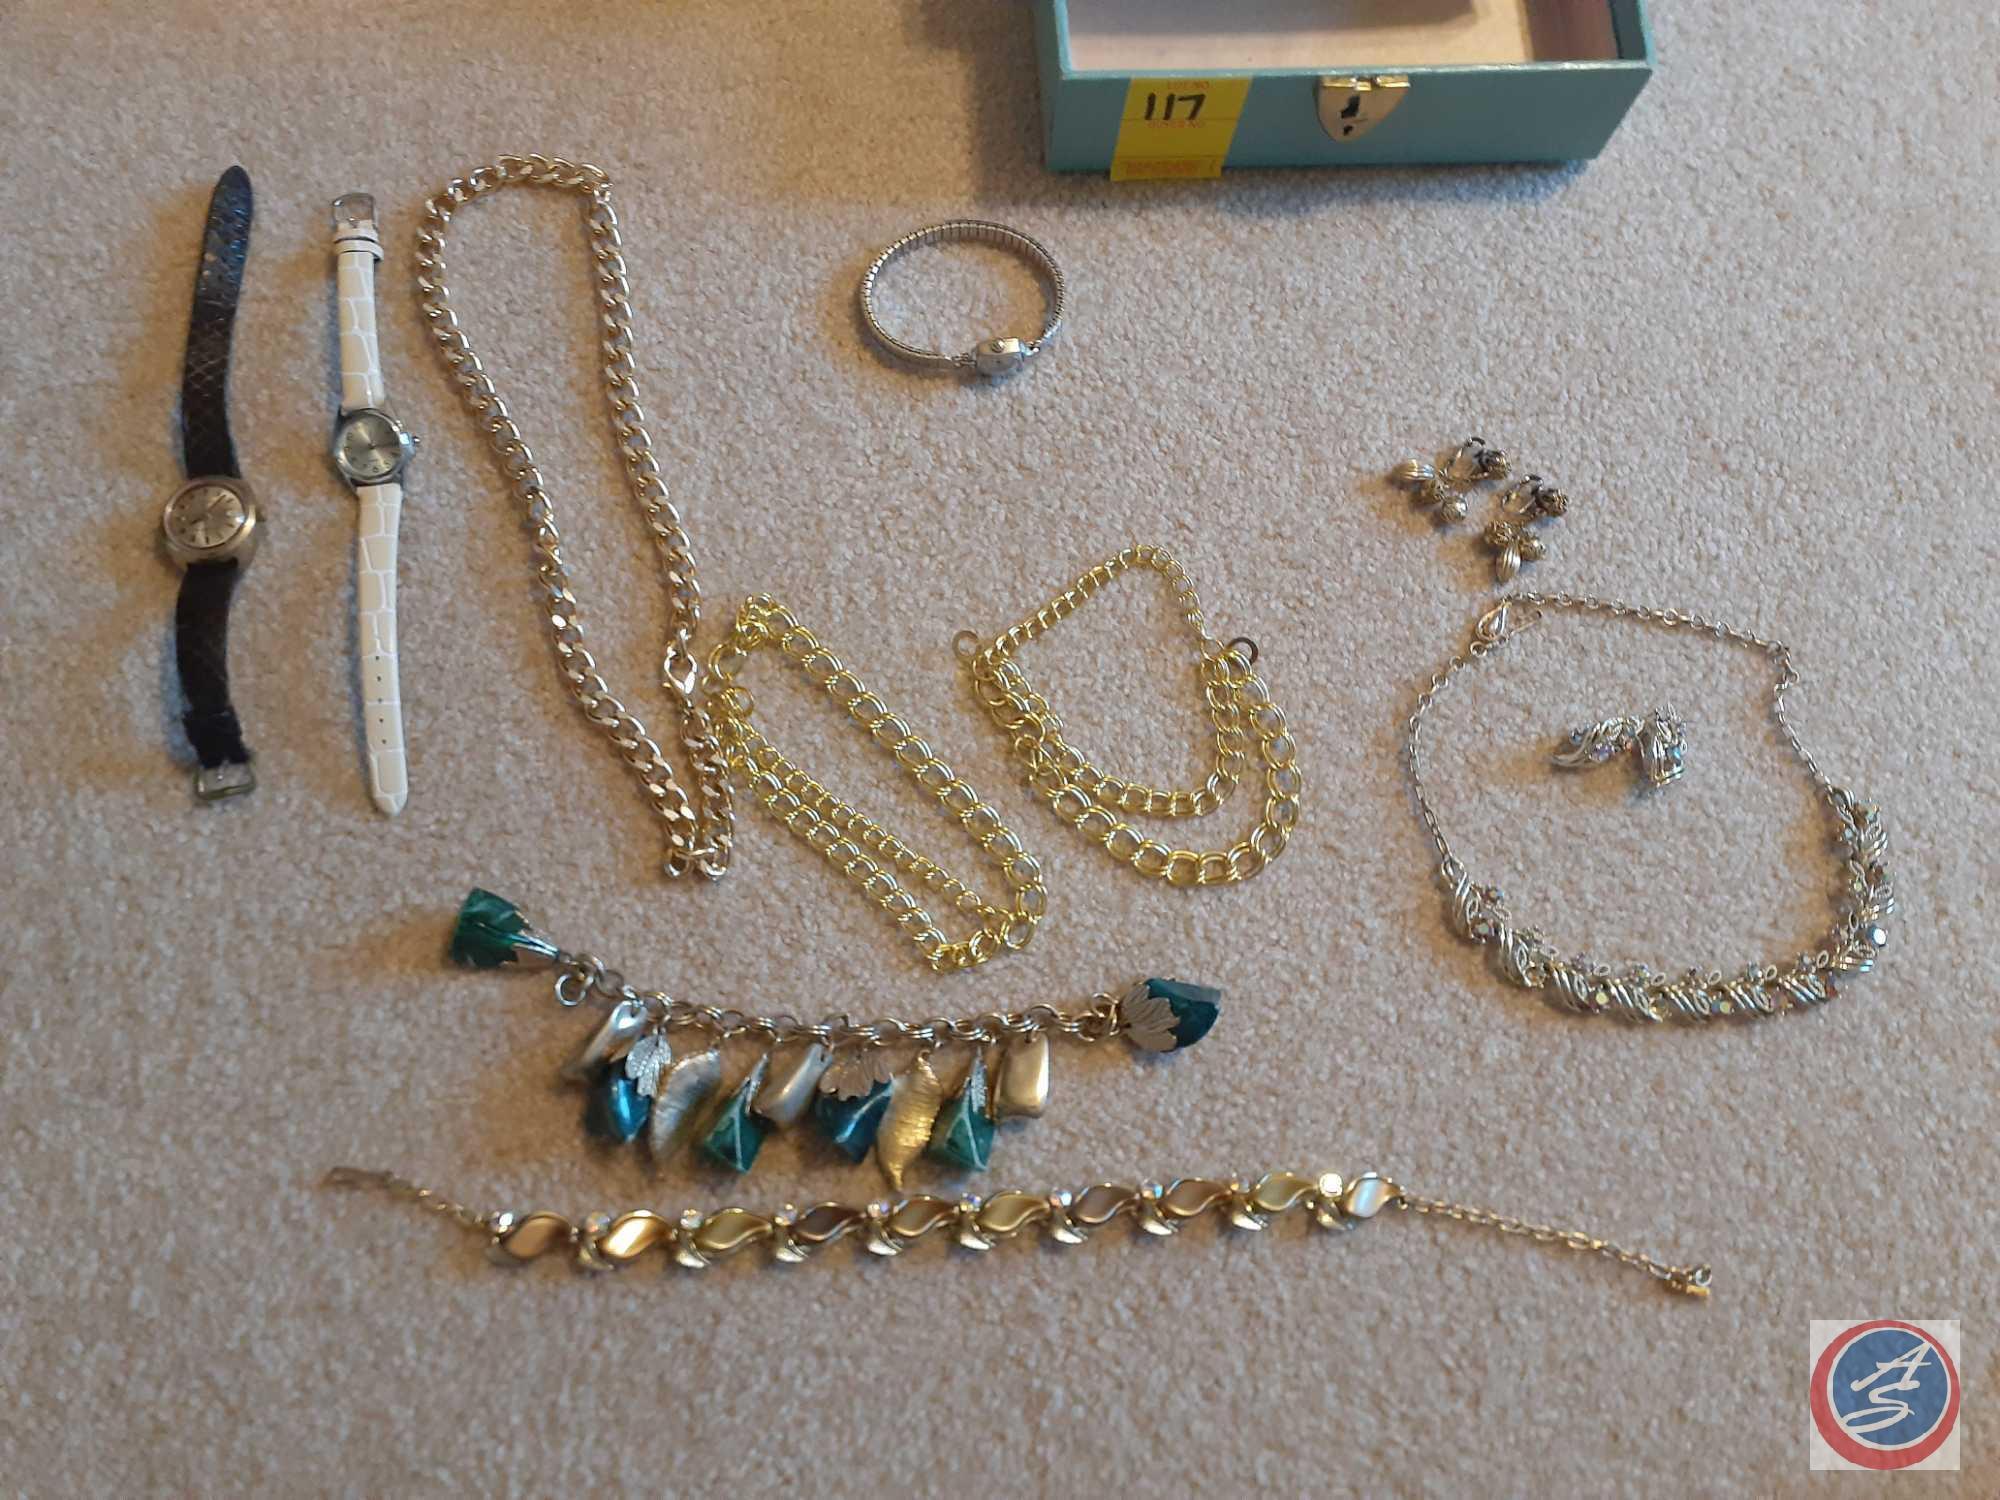 Jewelry Box Including Costume Jewelry, Timex Watch, Cameo Hat Pin, Necklaces, Bracelets and More